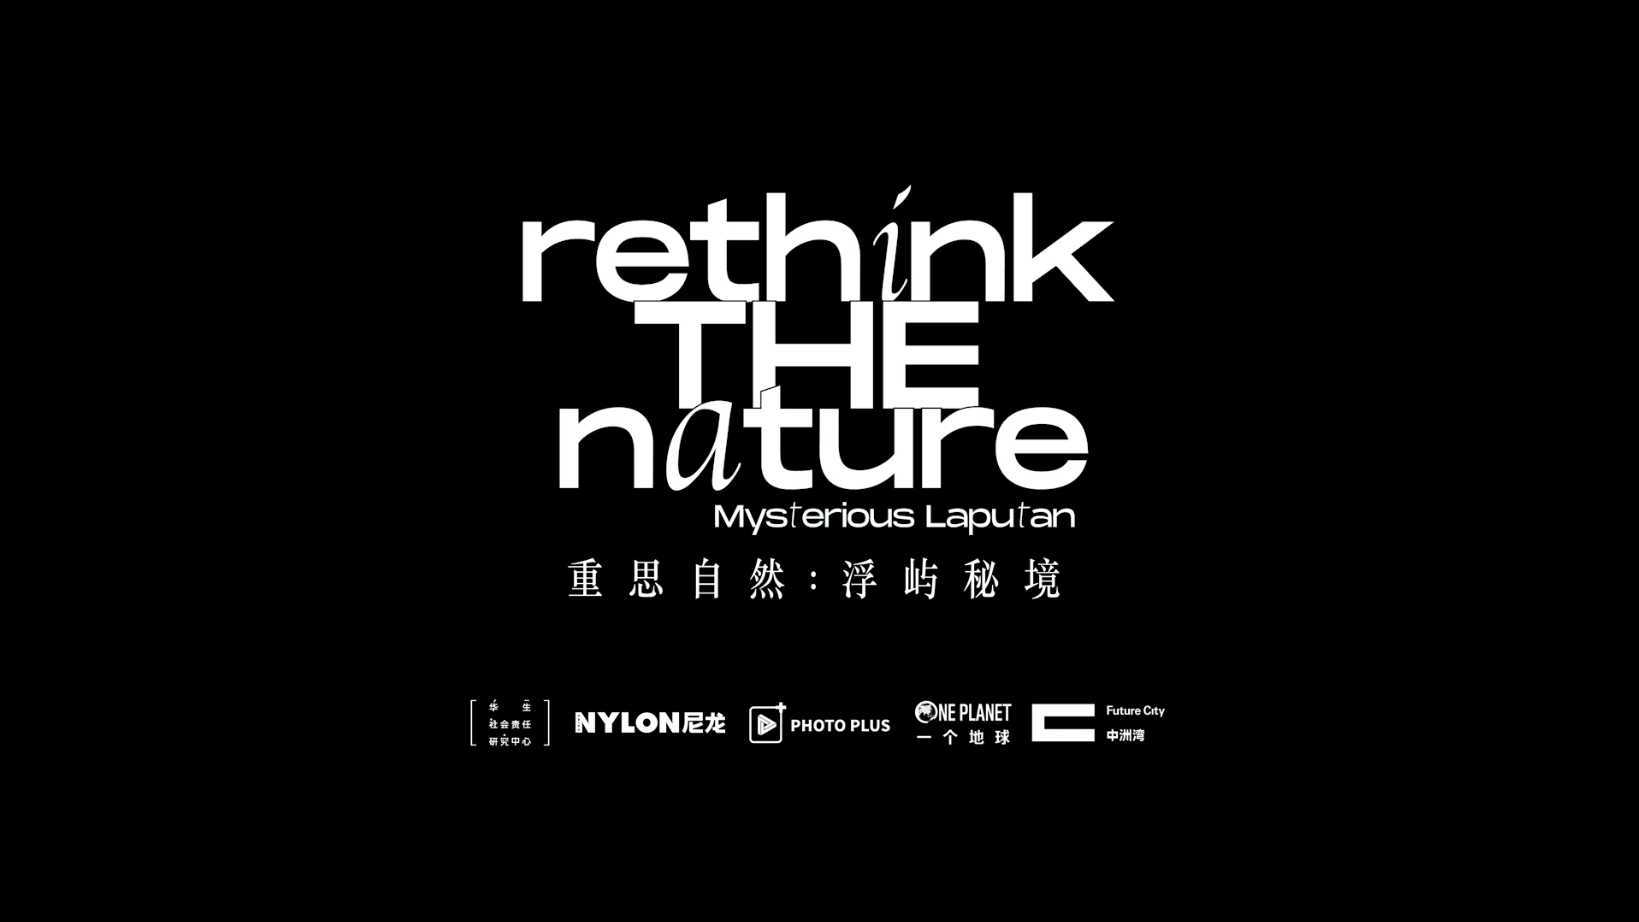 Rethink The Nature 重思自然：浮屿秘境